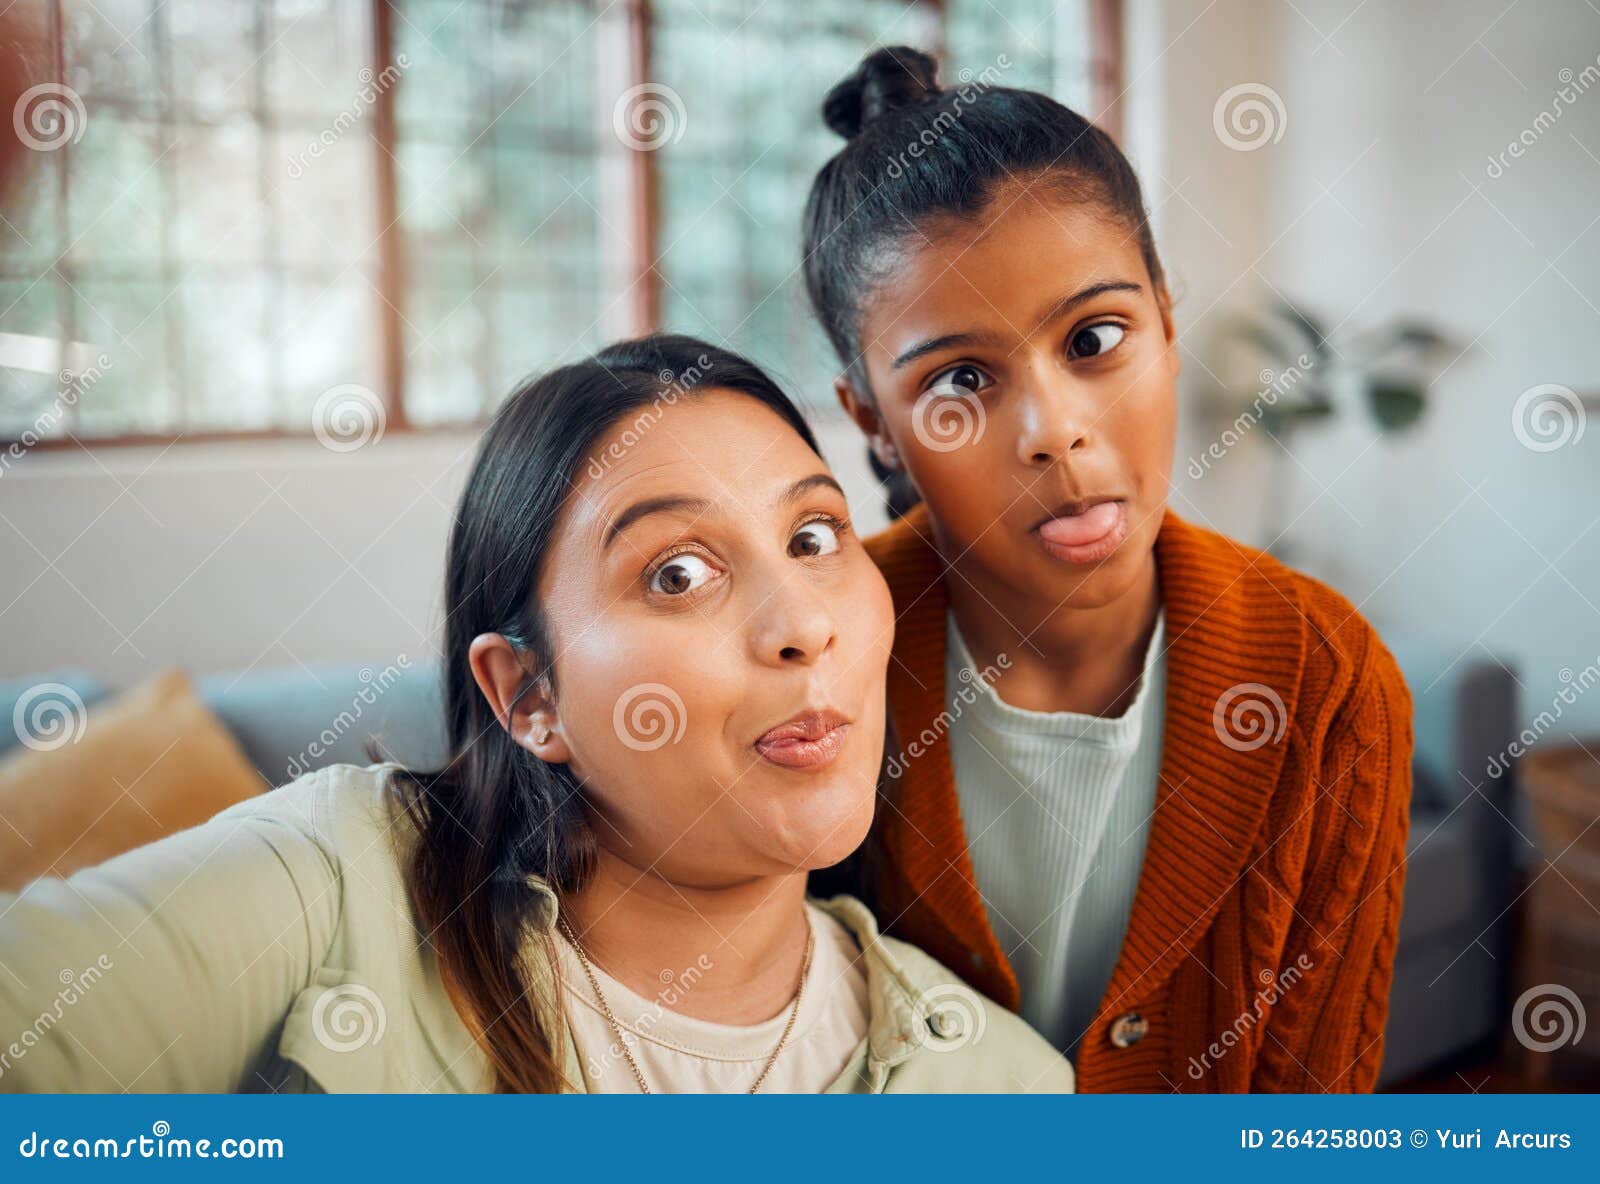 Selfie Mother And Daughter With Funny Comic Face And Bonding In Home Lounge With Love Care Or